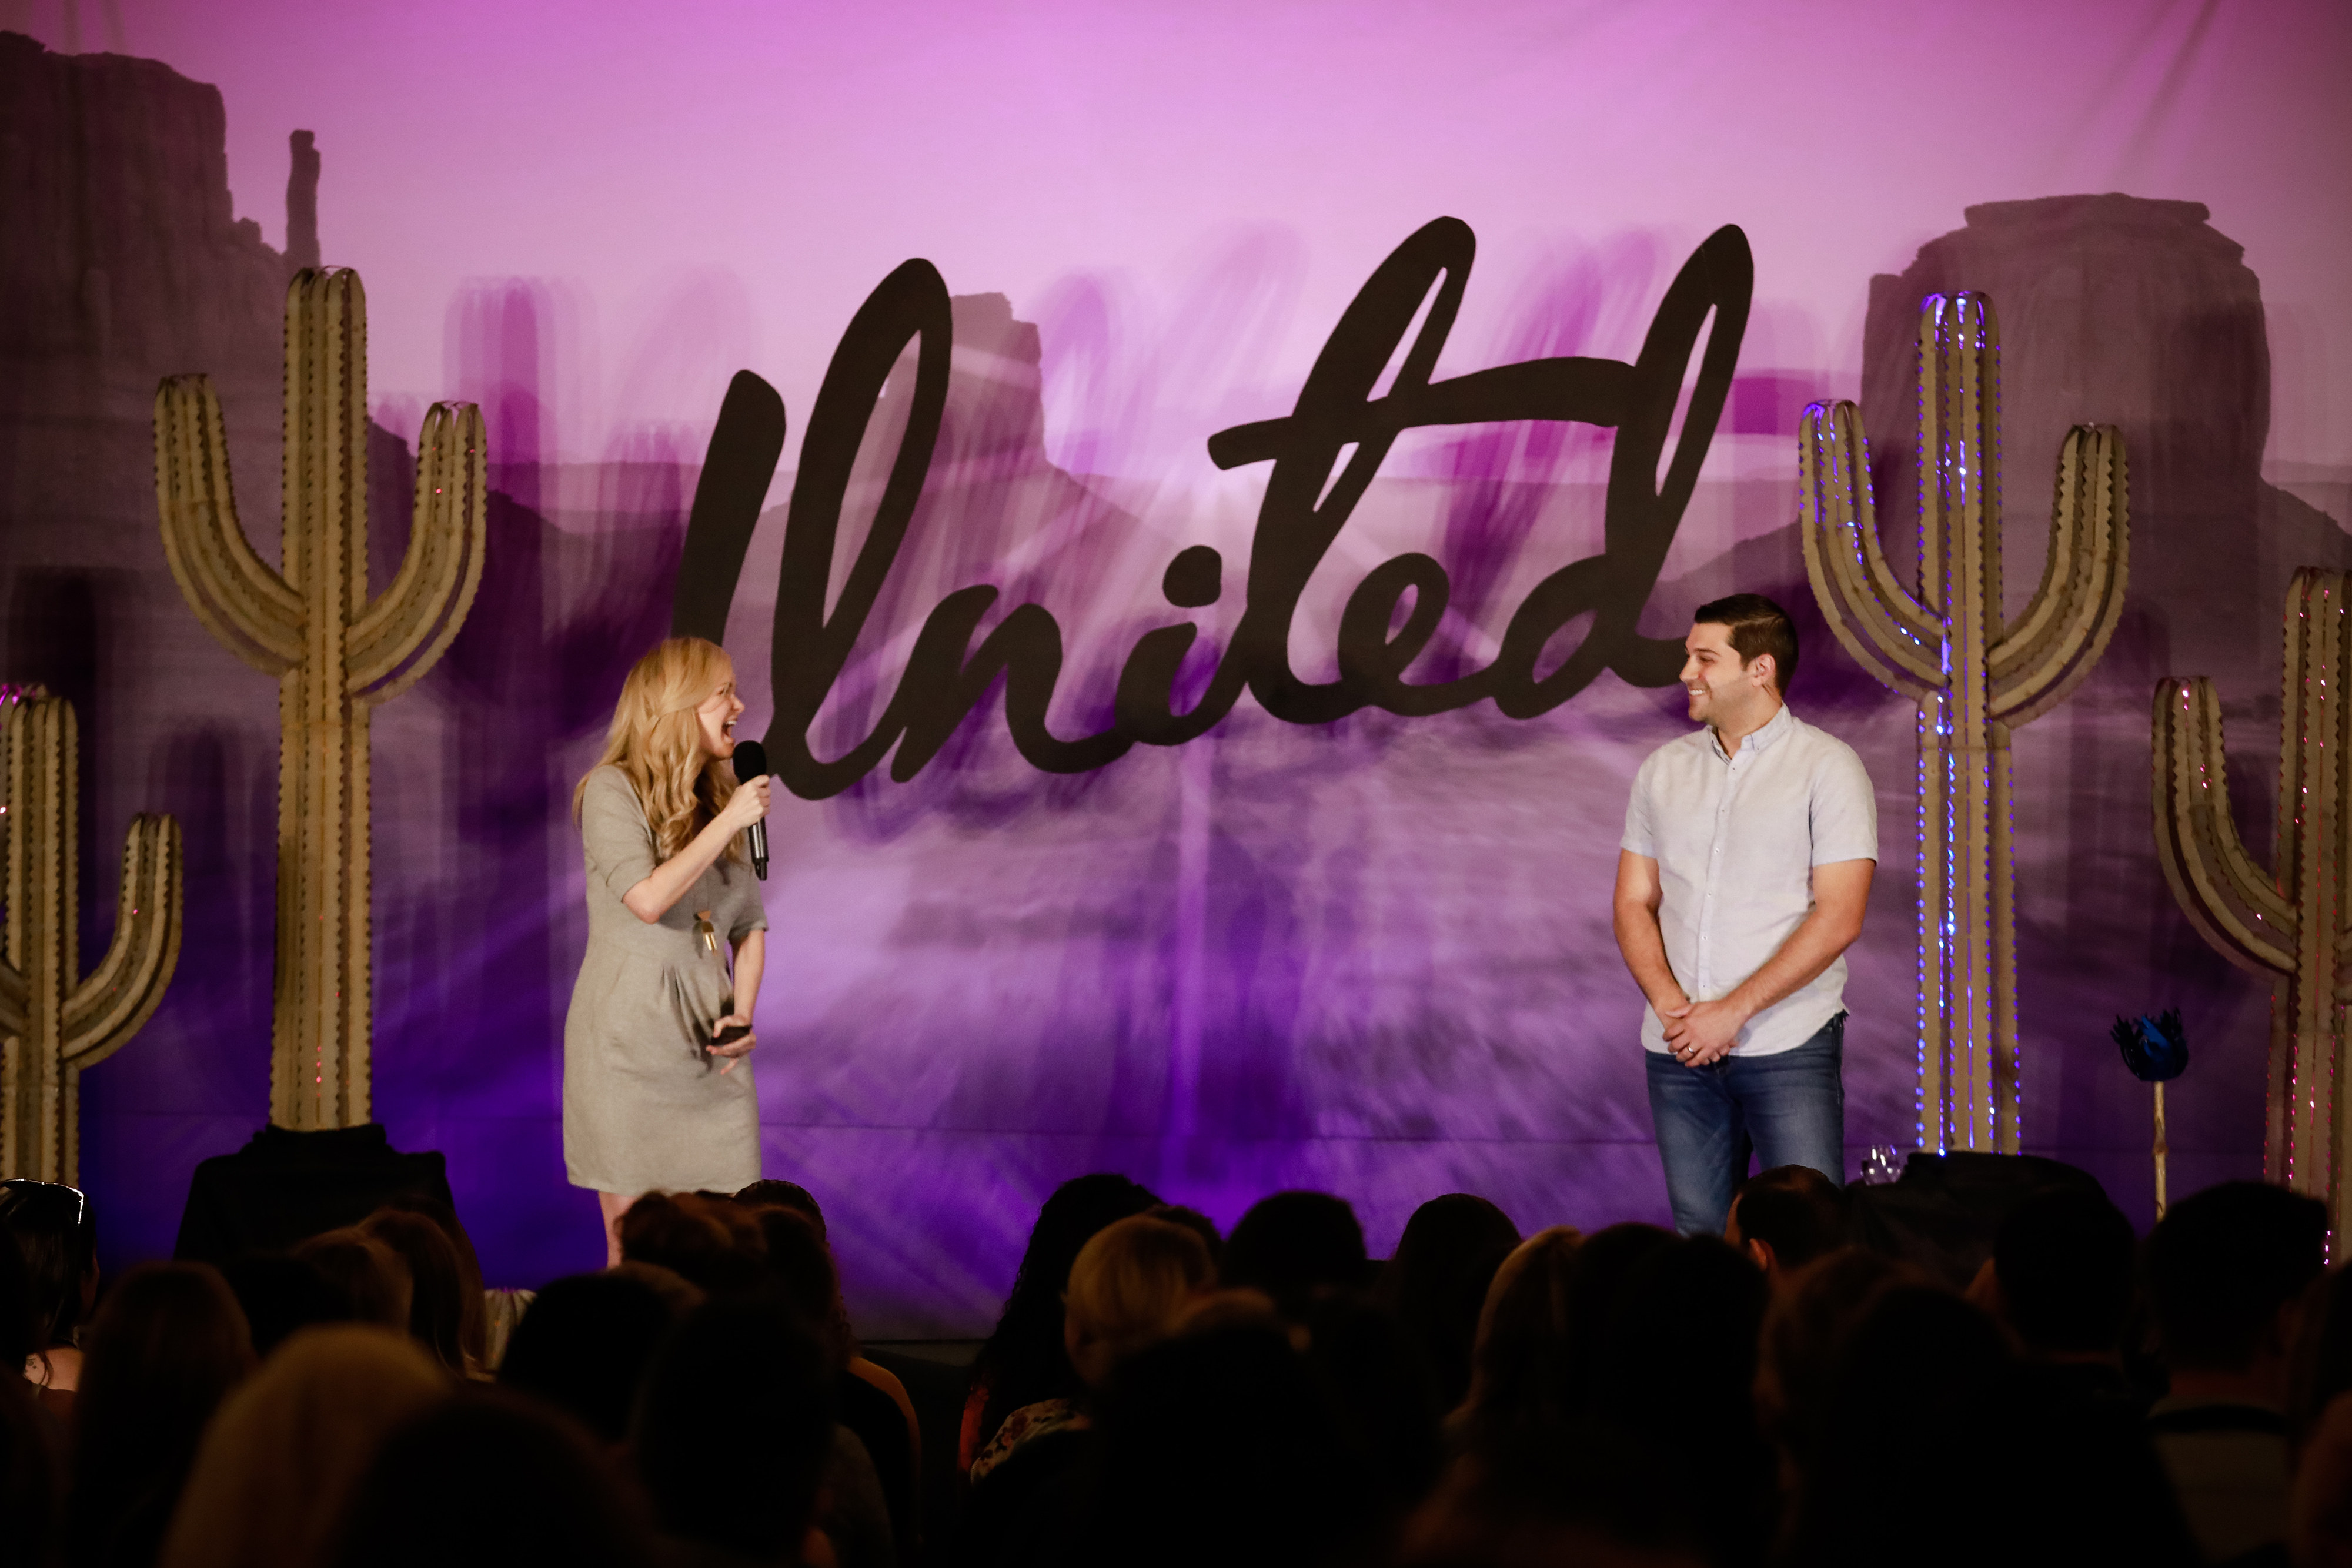 Creative Family Feature: United // Creative at Heart #creativefamilyfeature #creativeatheart #showit #united #conference